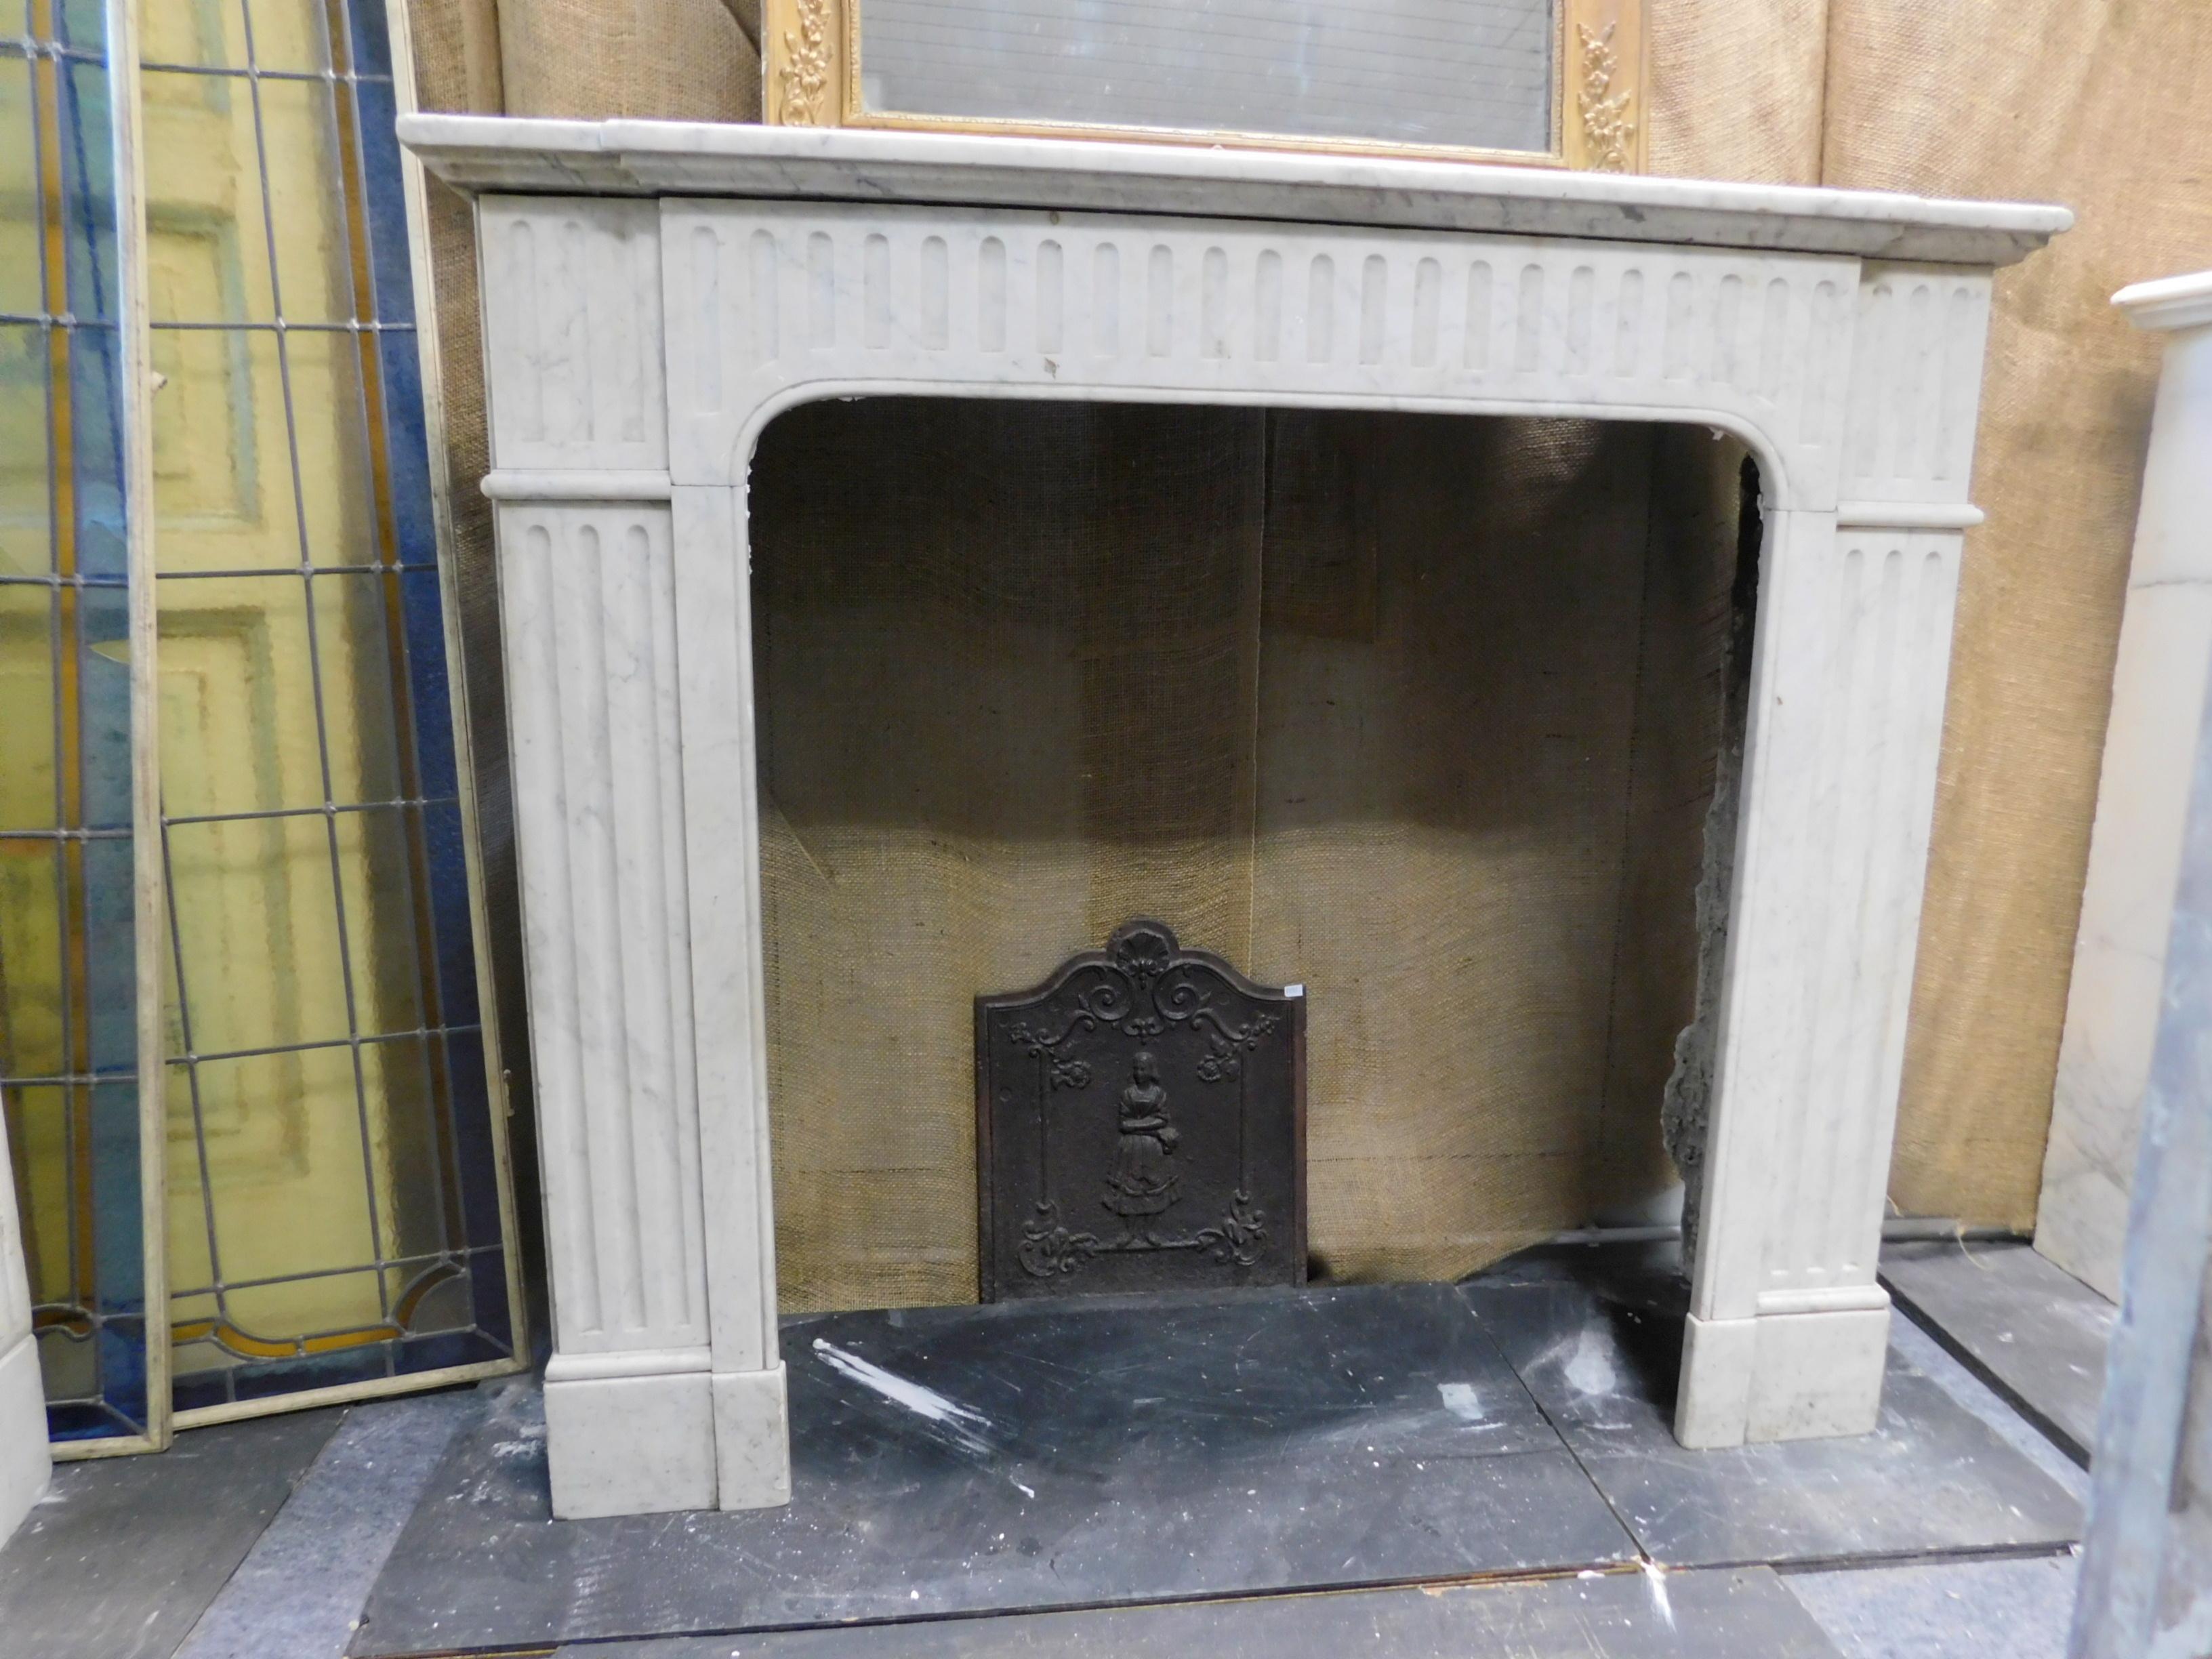 Antique fireplace in white Carrara marble, linear and geomentric but with a mouth with rounded corners and sculpted columns, built in the late 18th century in France.
Simple yet elegant, suitable for decorating your home or indoor warmth, beautiful